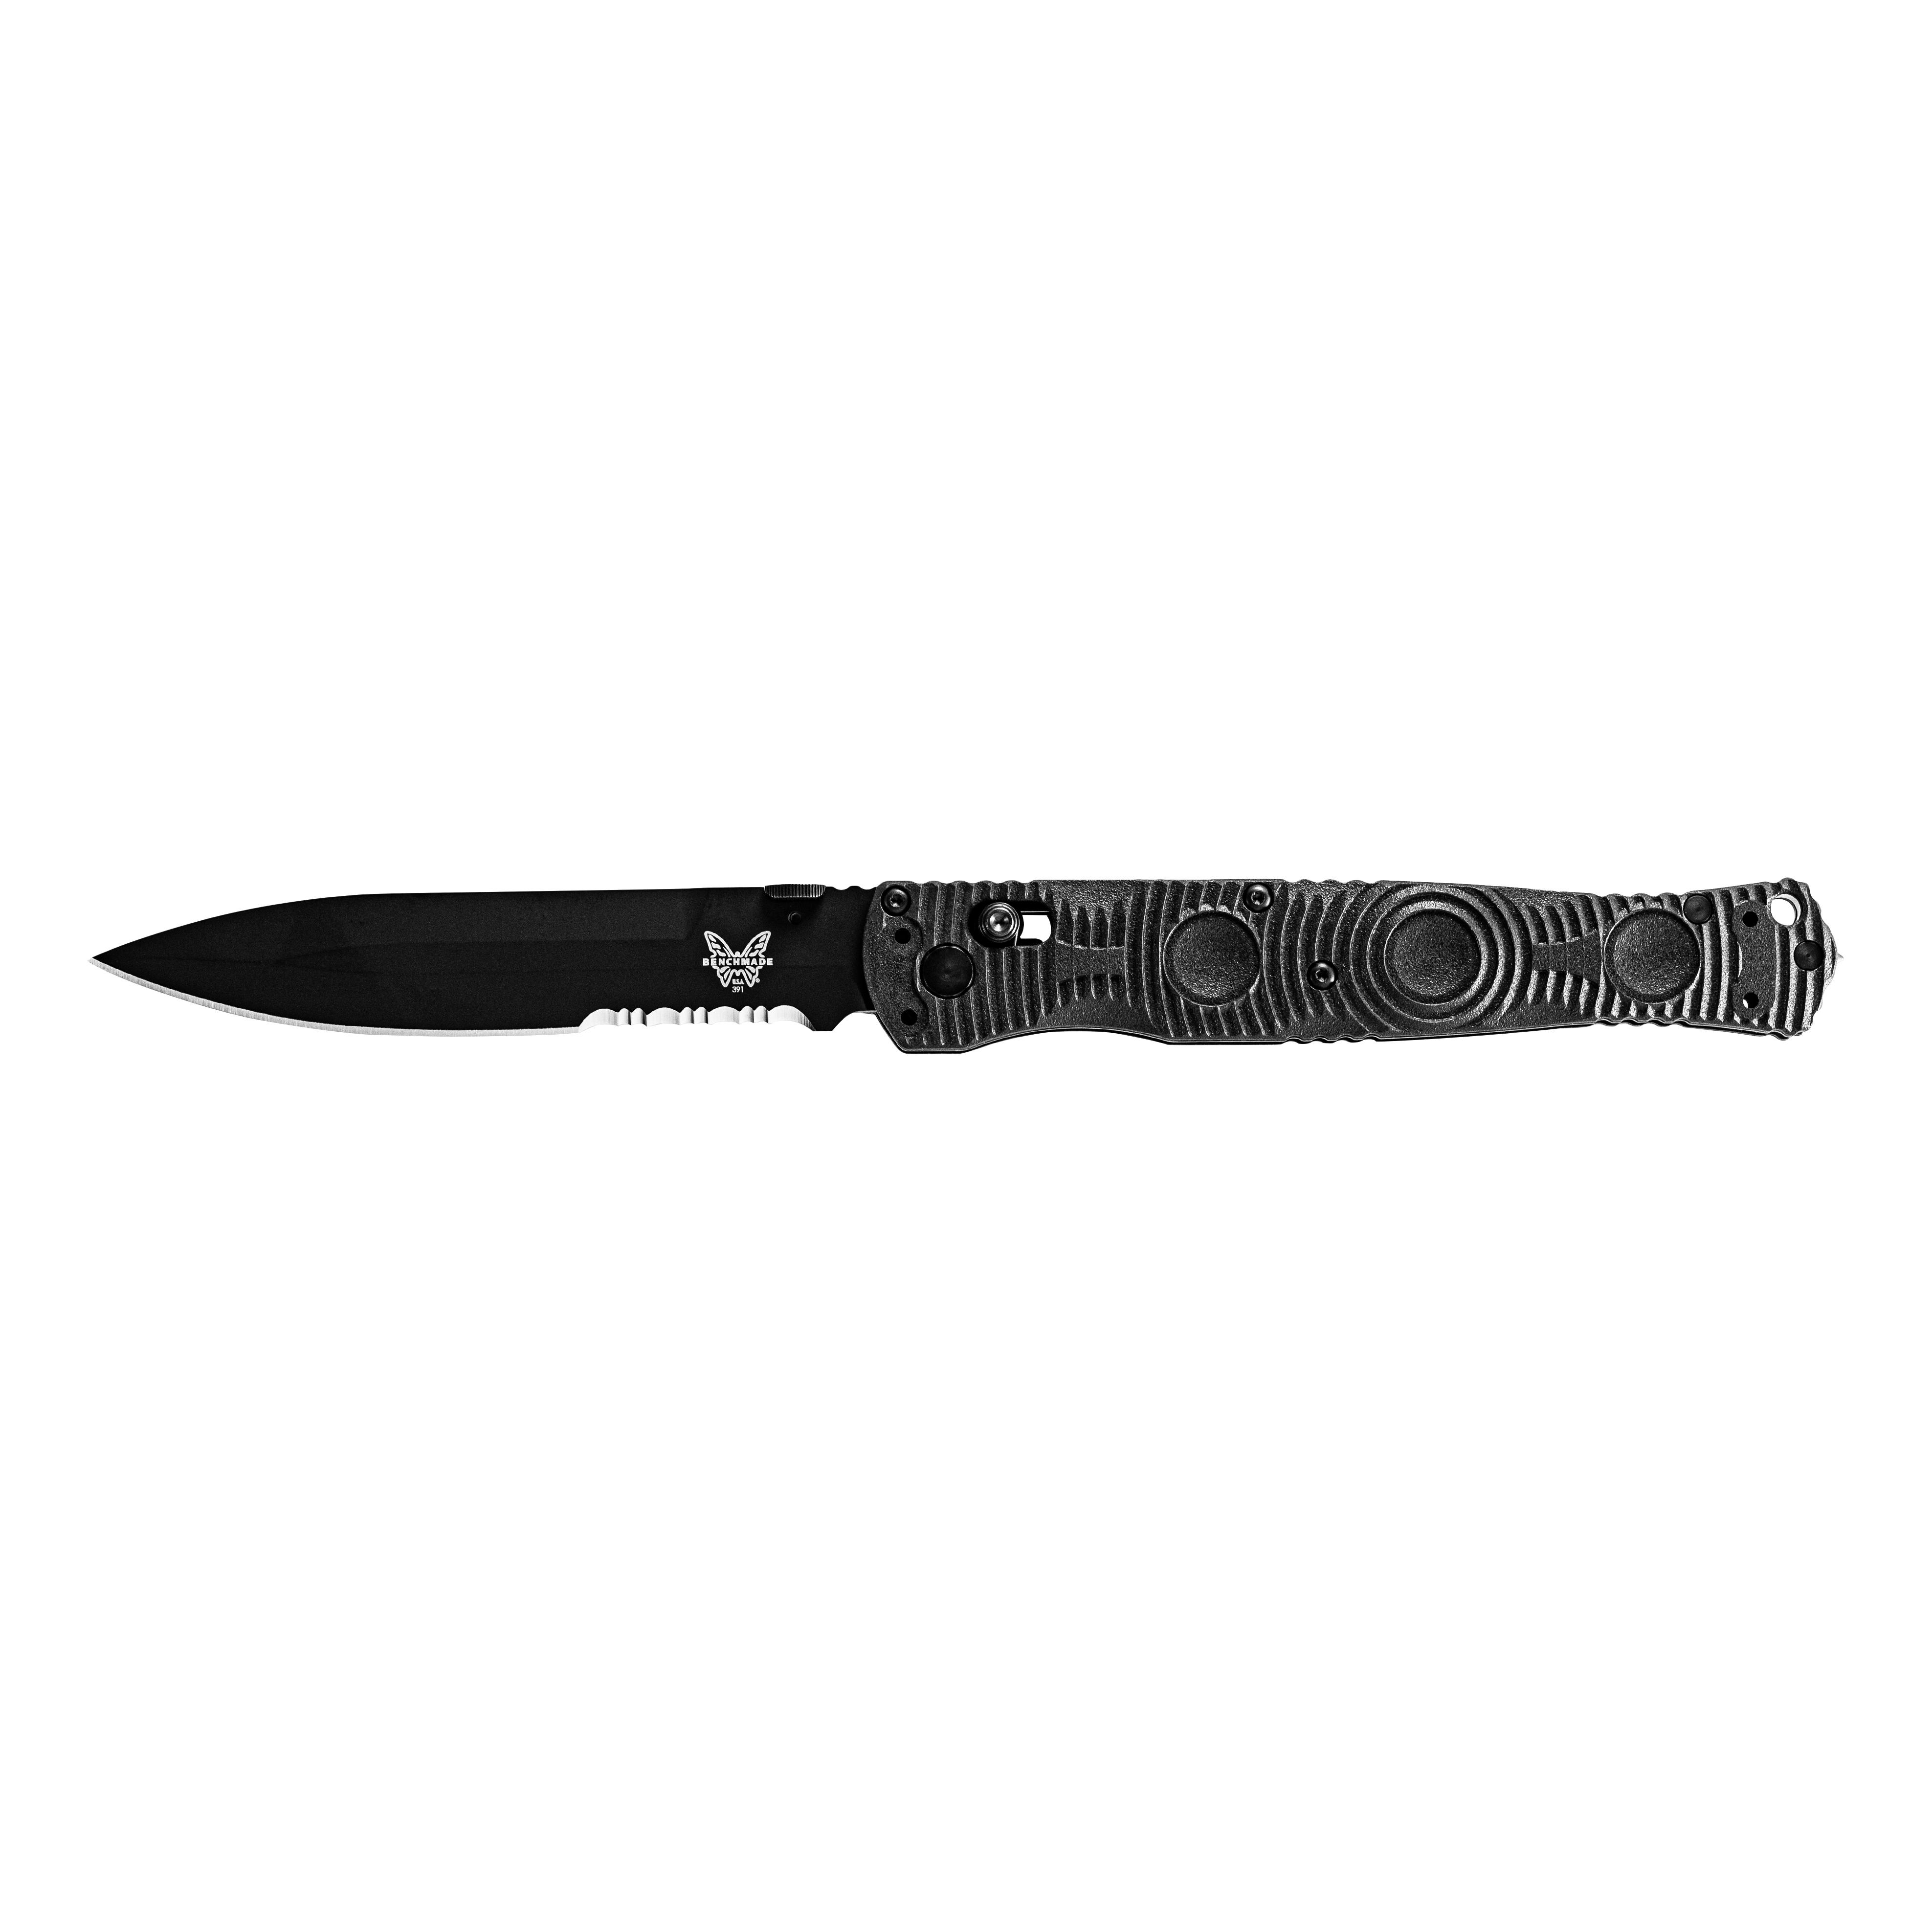 Benchmade® 391SBK SOCP Tactical Folding Knife - Open View